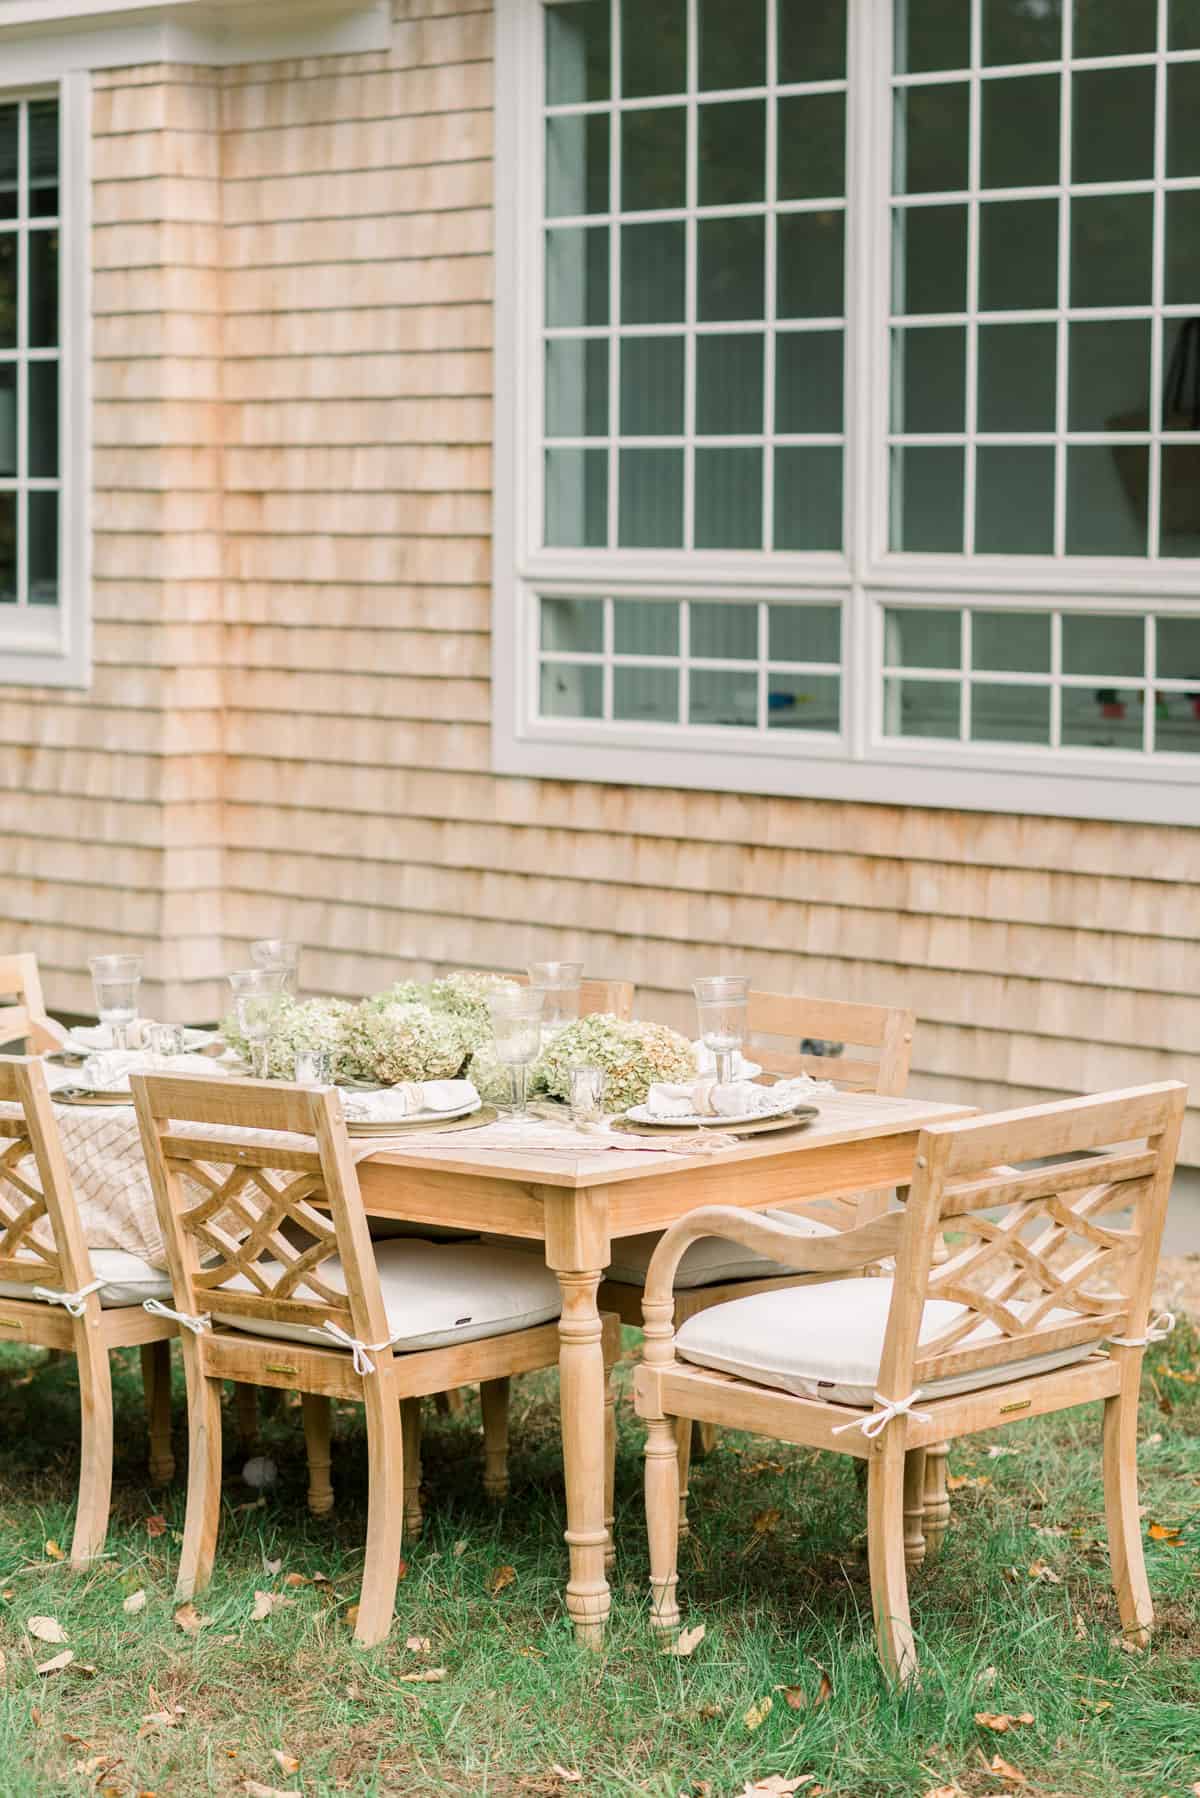 Outdoor dining area with teak table and chairs